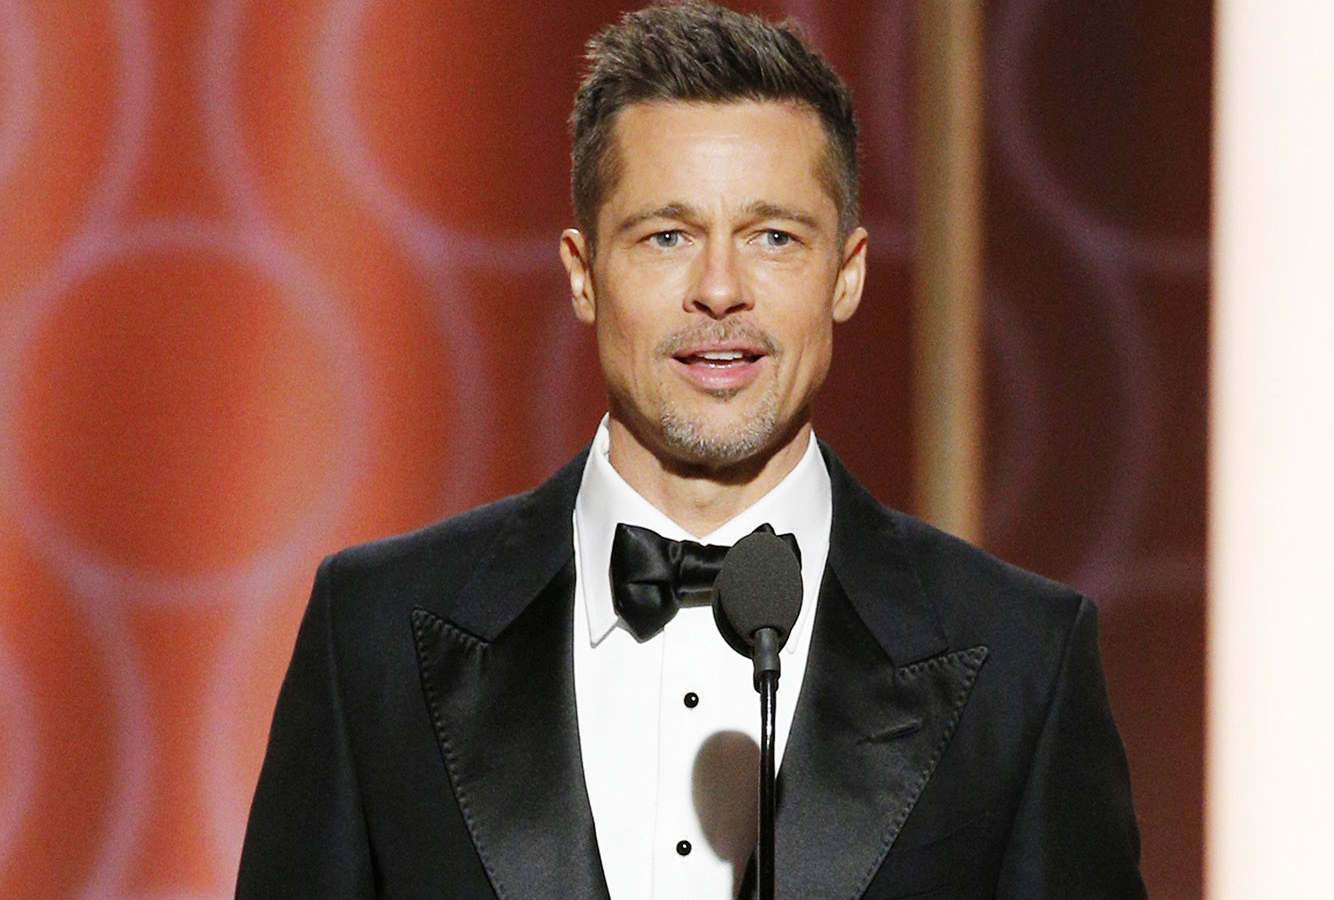 When Will You Meet Your Soulmate? ❤️ Rate a Bunch of Male Celebrities to Find Out brad pitt